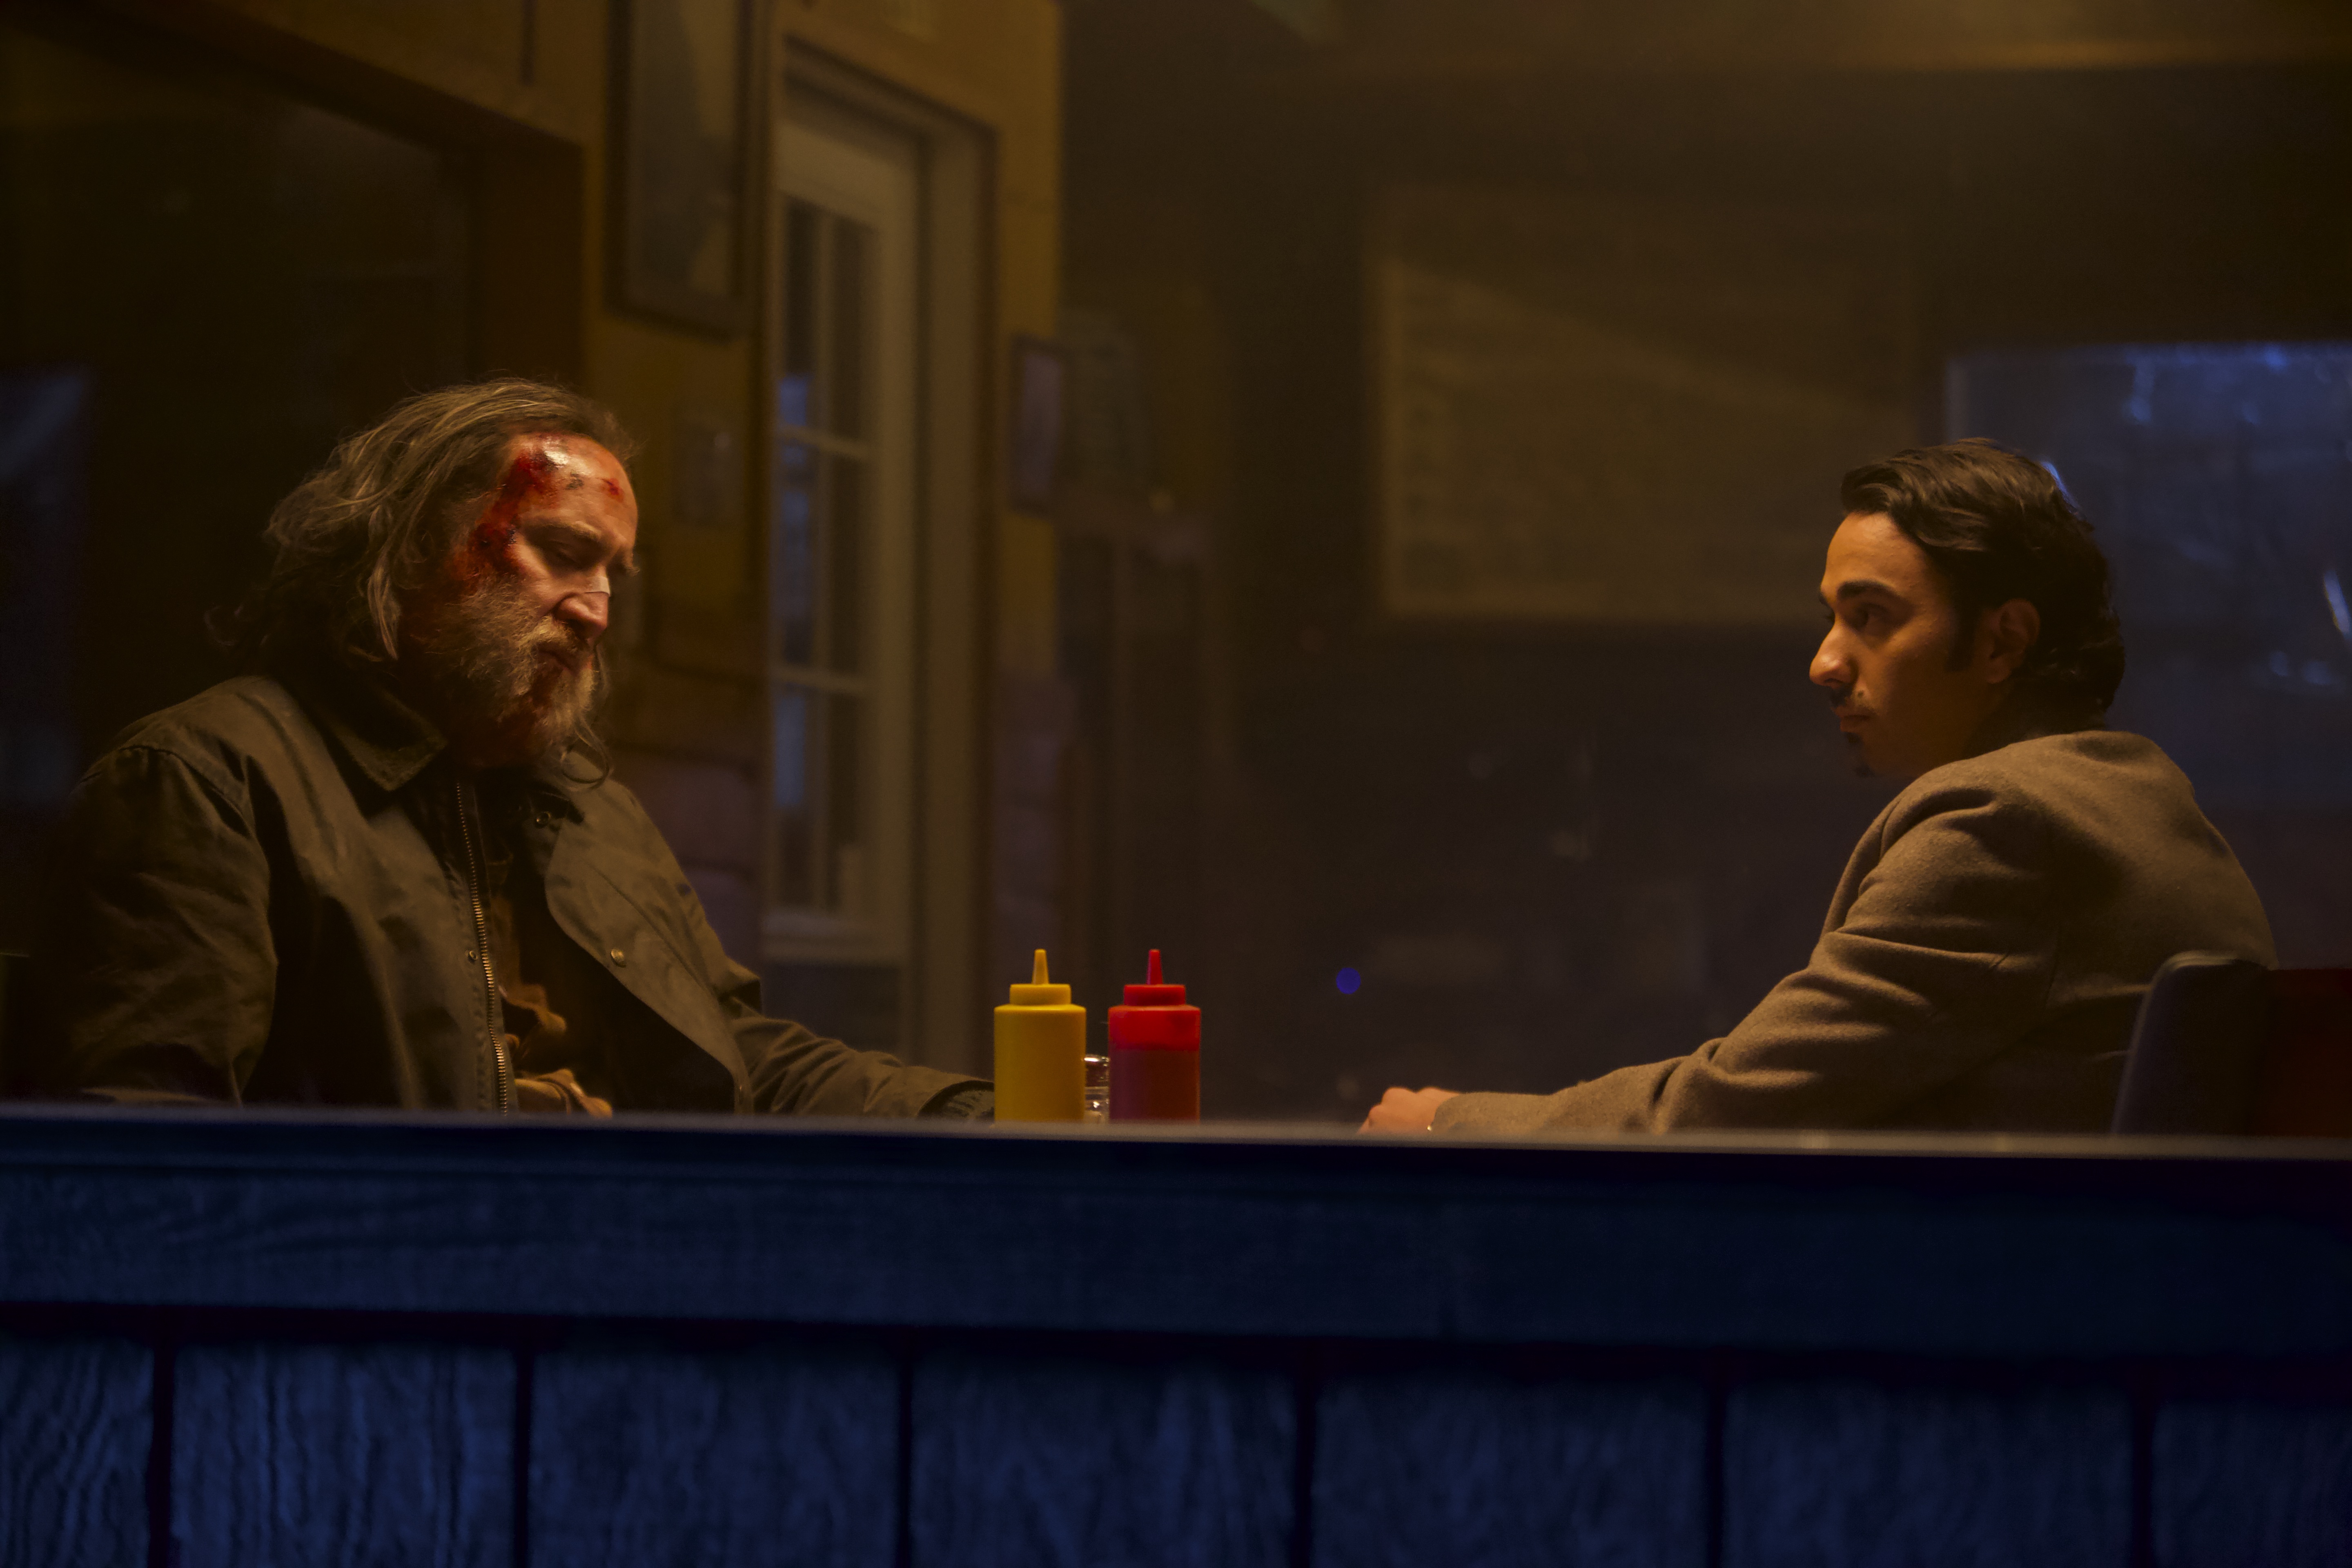 A still from ‘Pig’ featuring Nicolas Cage and Alex Wolff sitting in a diner.